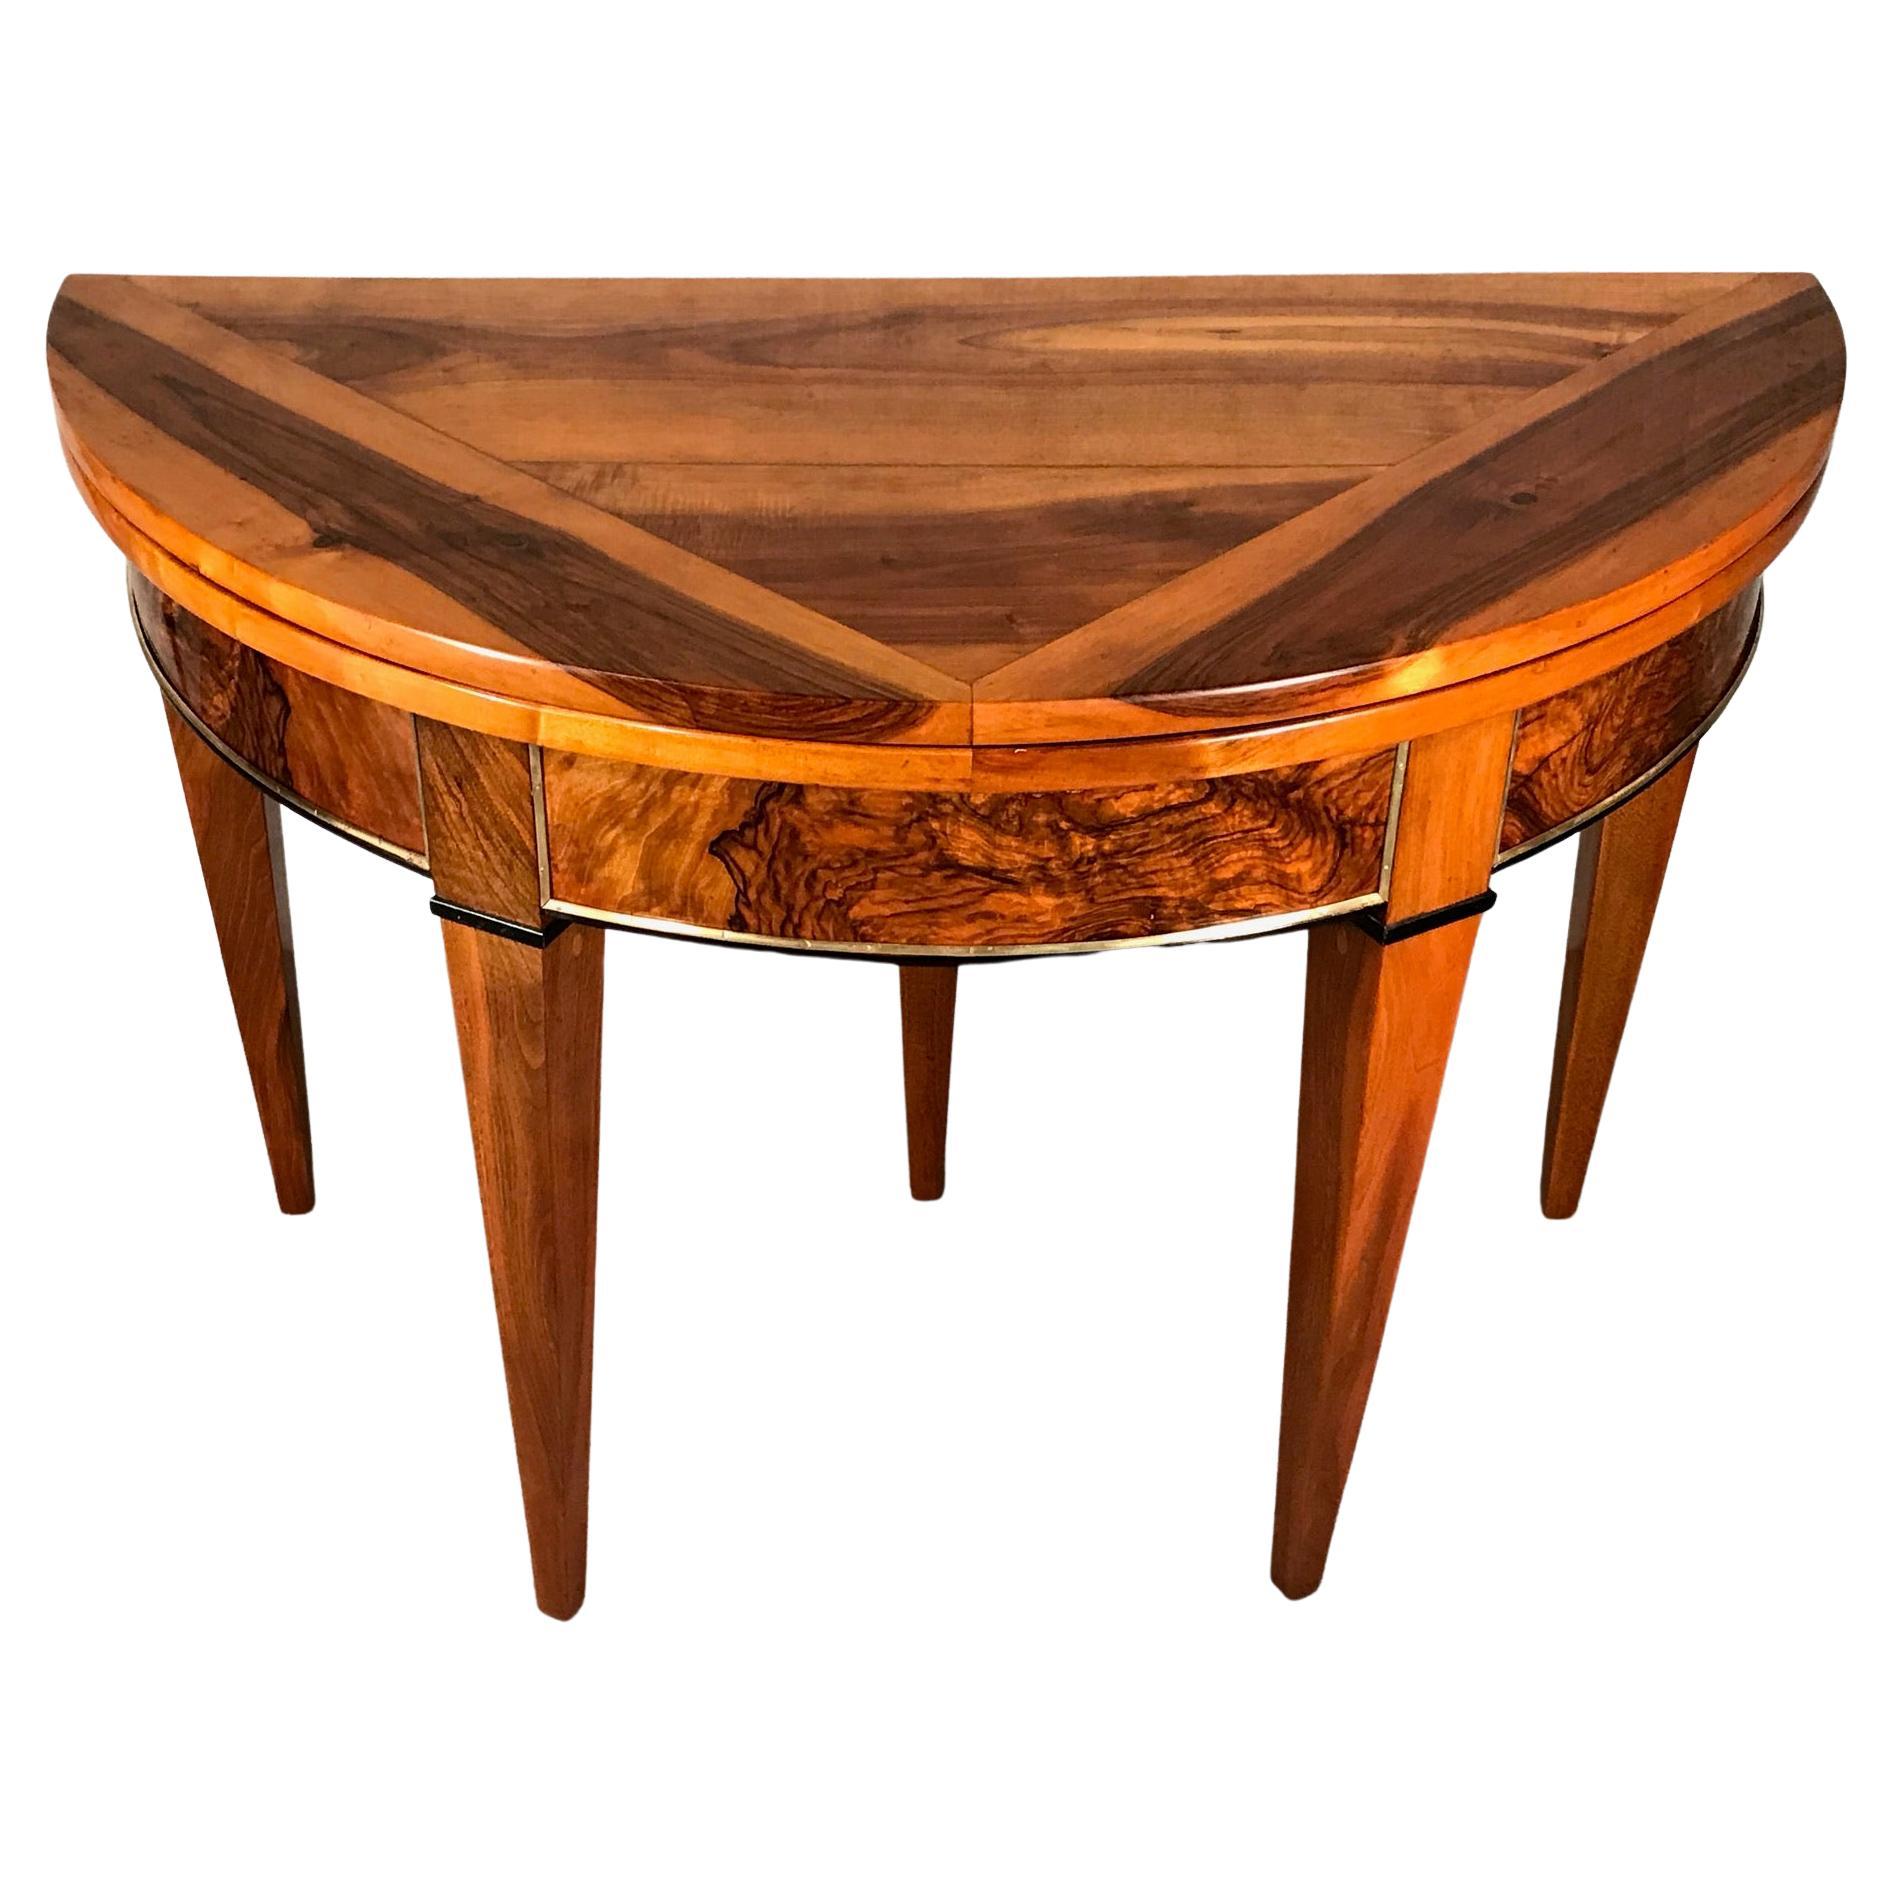 Demilune Table, South West Germany 1810, Walnut